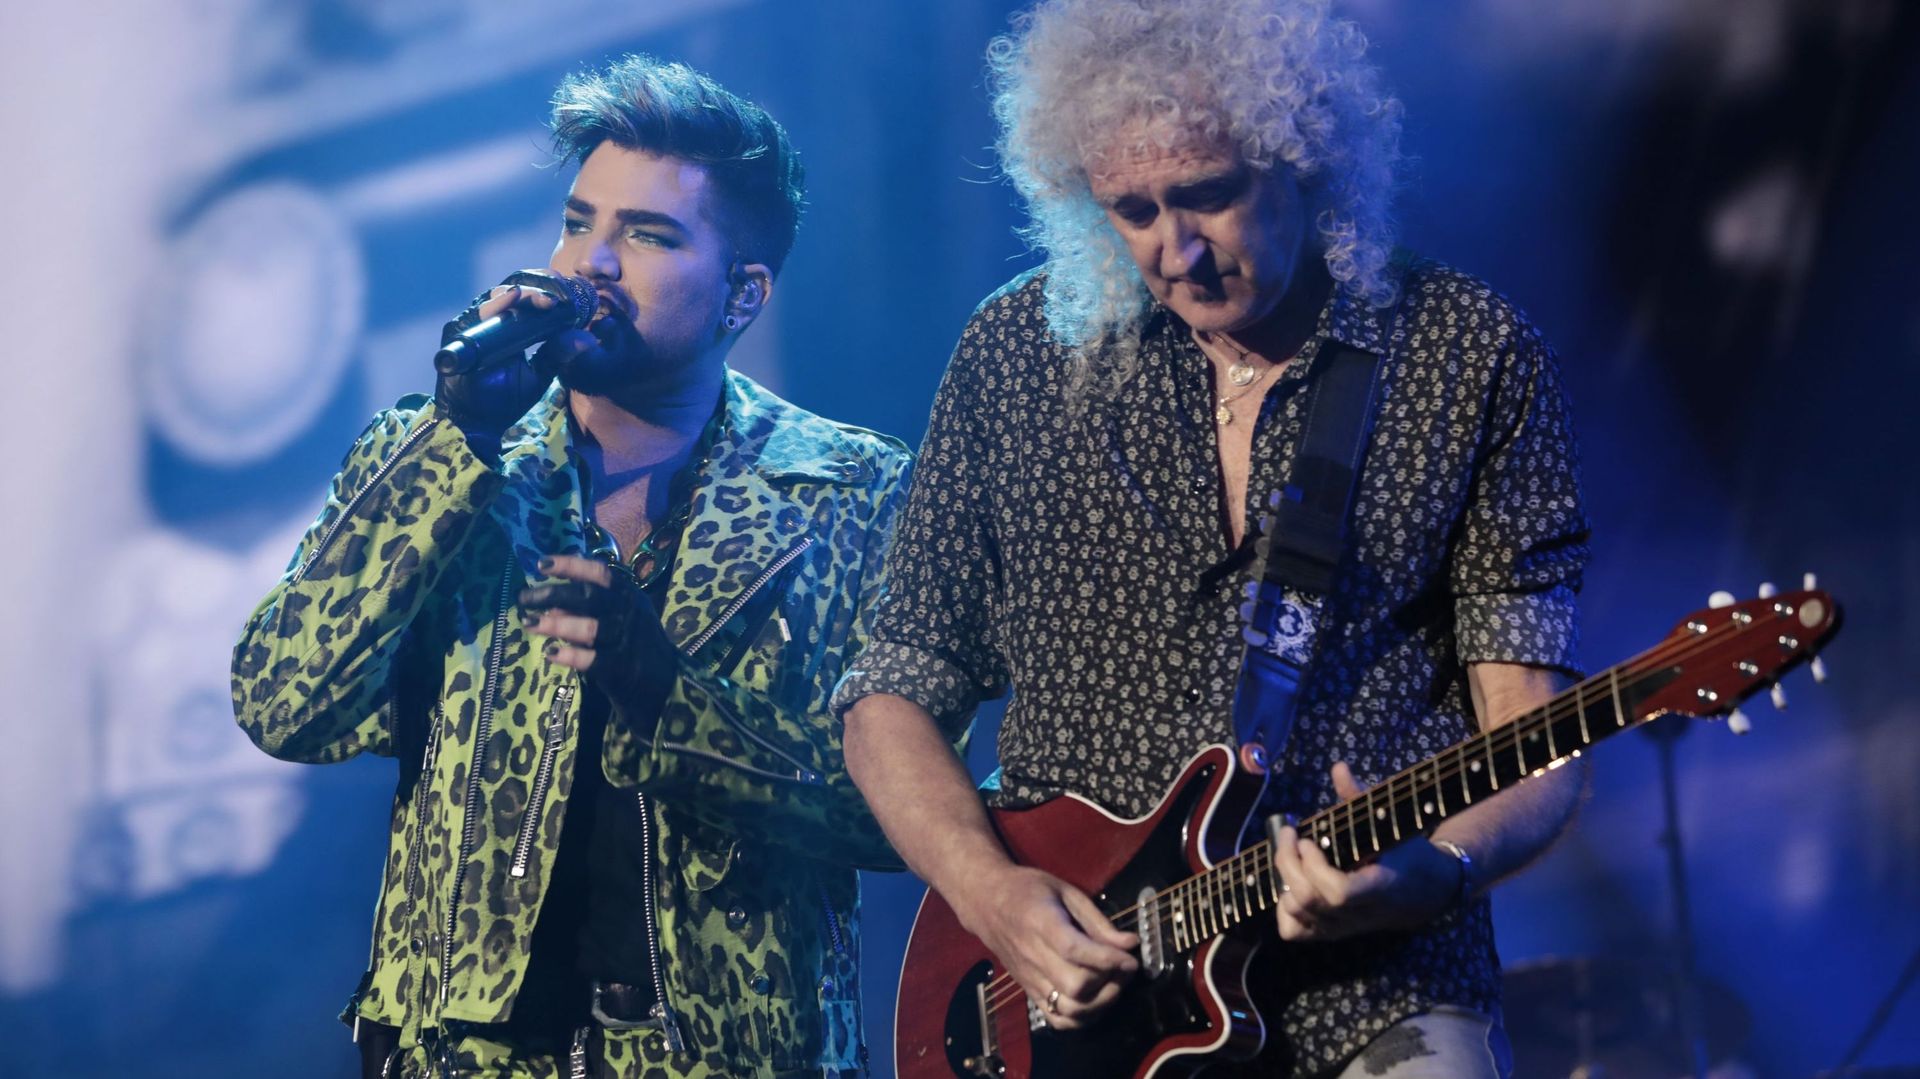 queen-le-documentaire-the-show-must-go-on-the-queen-adam-lambert-story-disponible